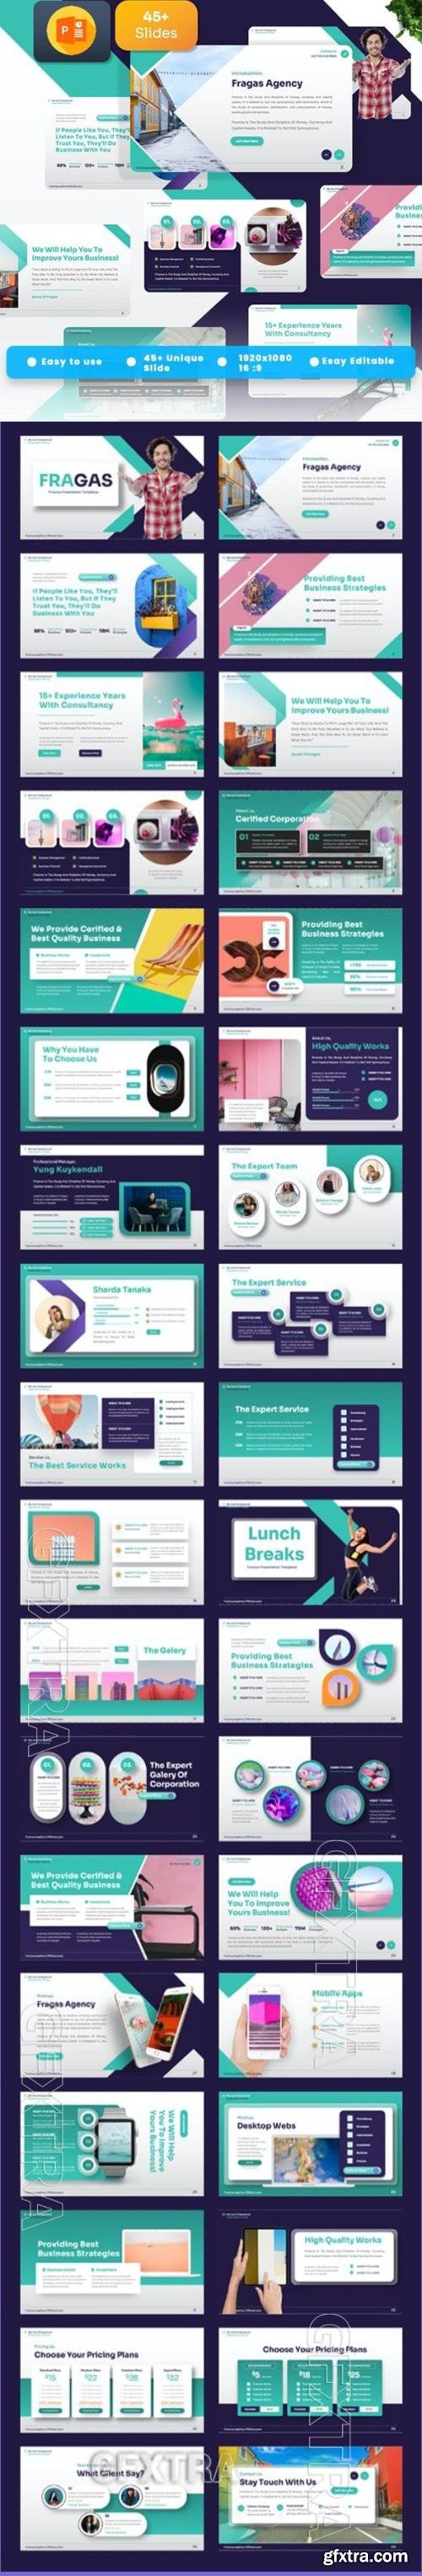 Fragas - Finance Powerpoint Templates 49551663